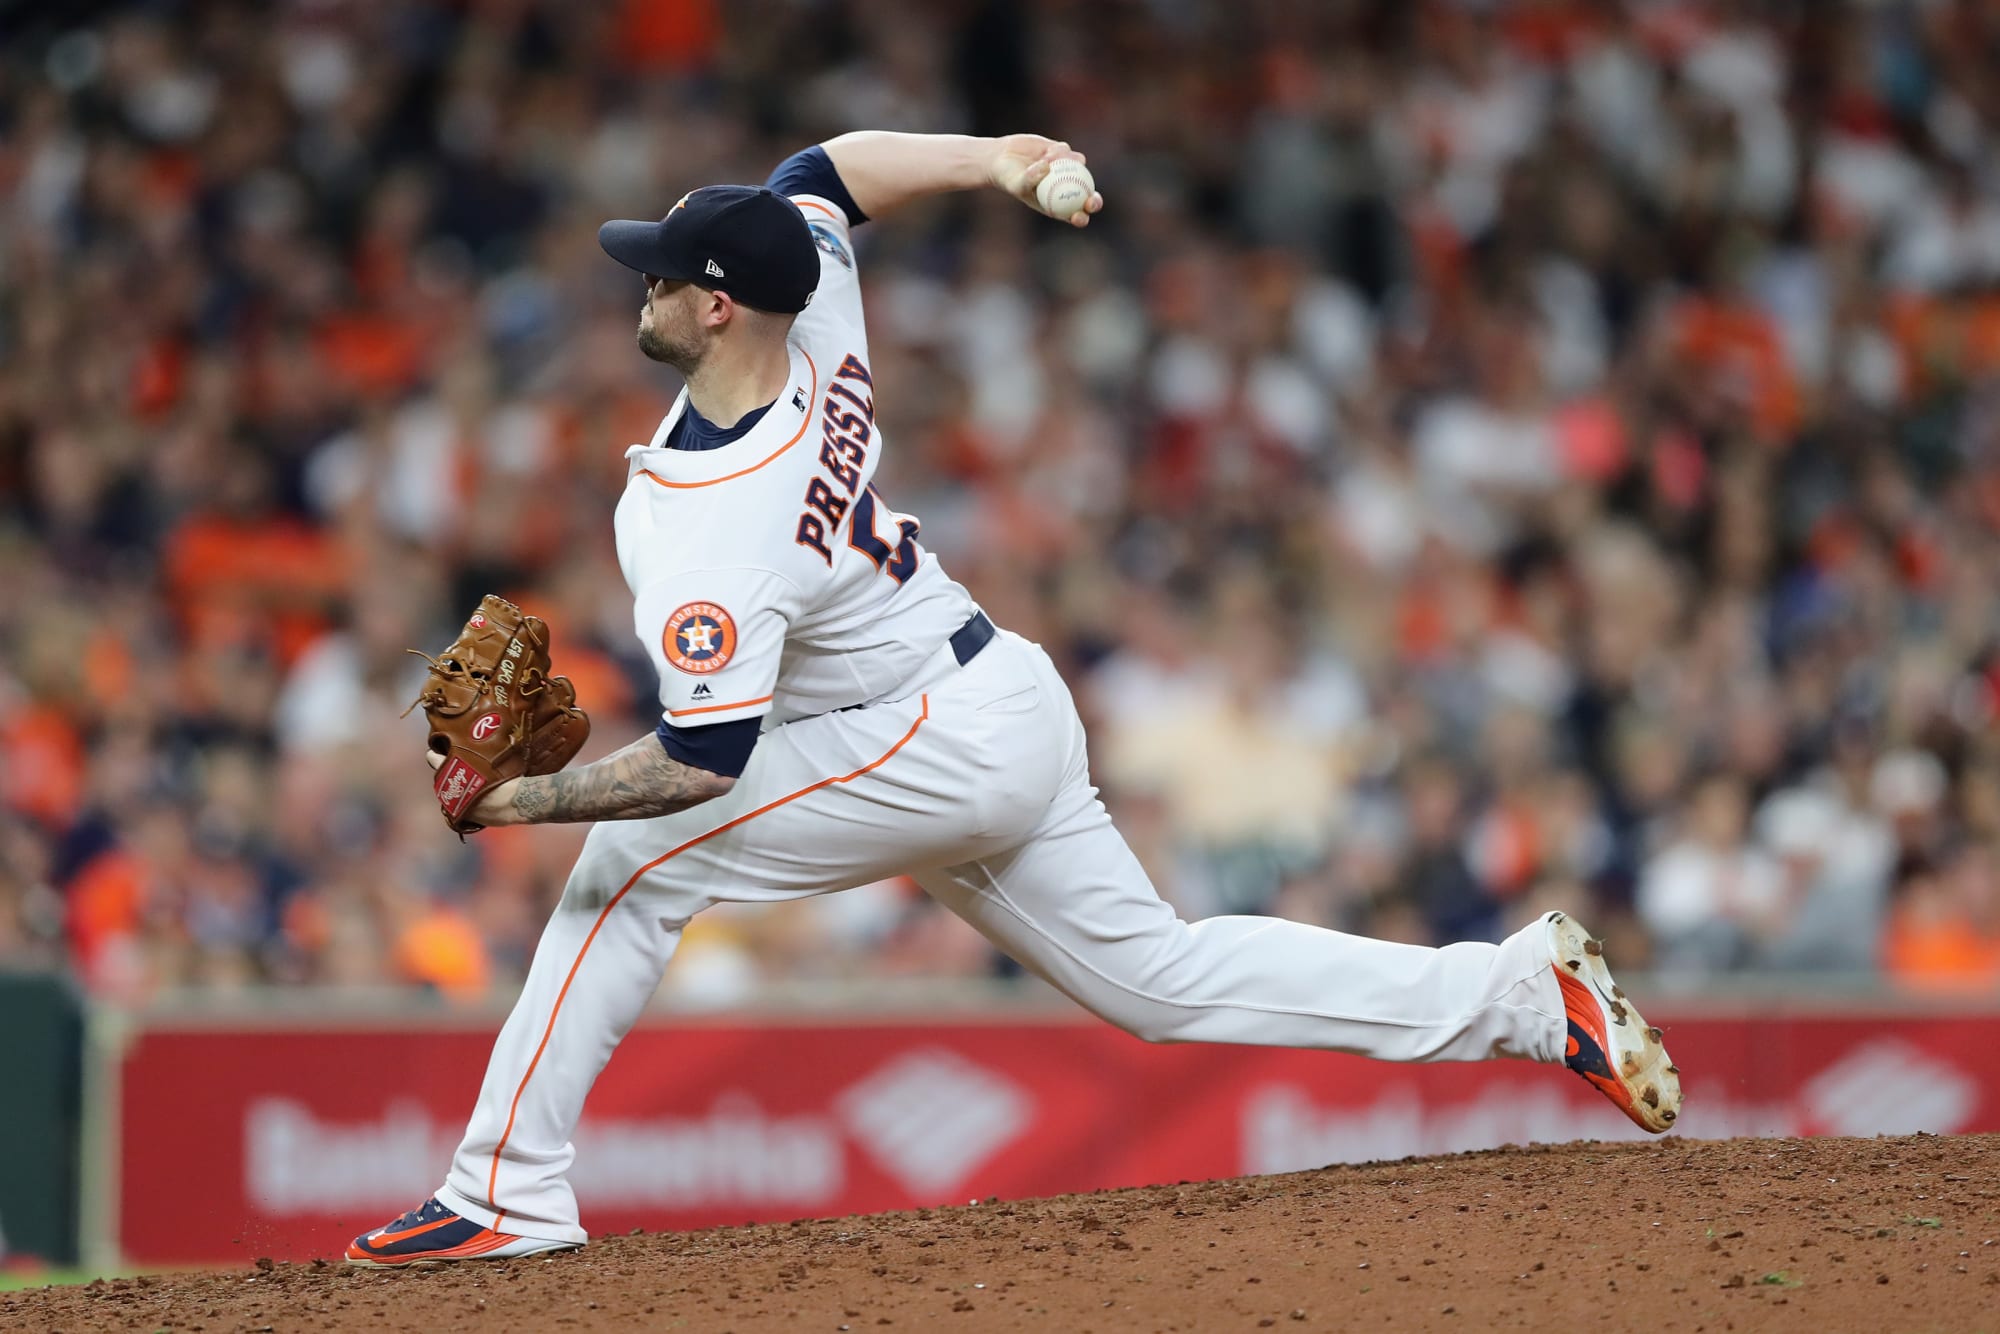 The Astros bullpen has become an elite unit, but Ryan Pressly is still